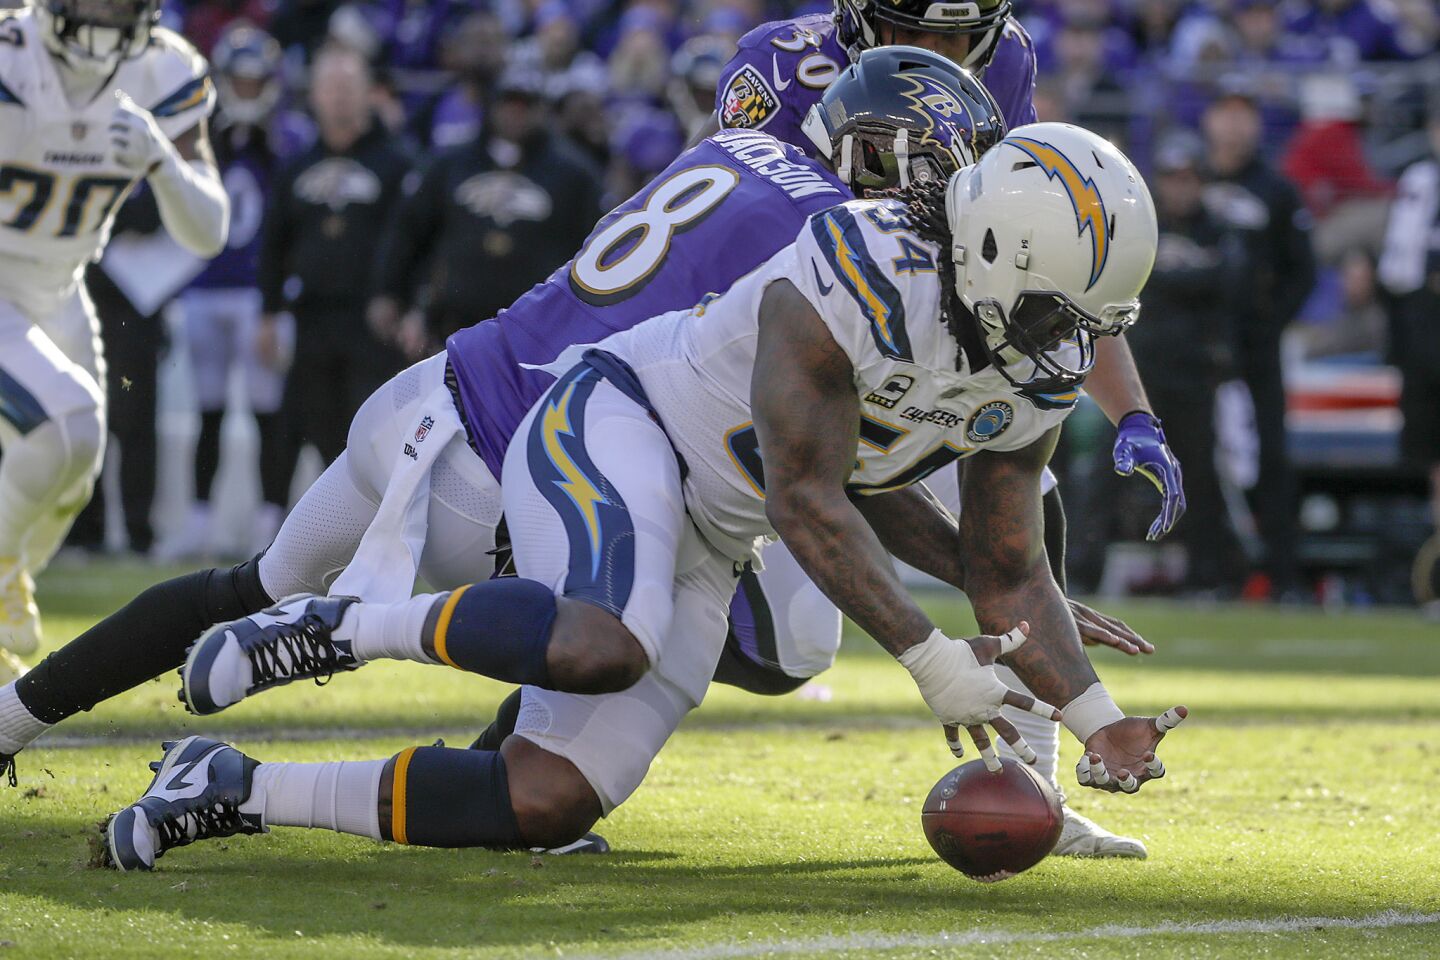 Chargers linebacker Melvin Ingram chases after a fumble by Ravens quarterback Lamar Jackson, who ultimately recovered it during the first half.